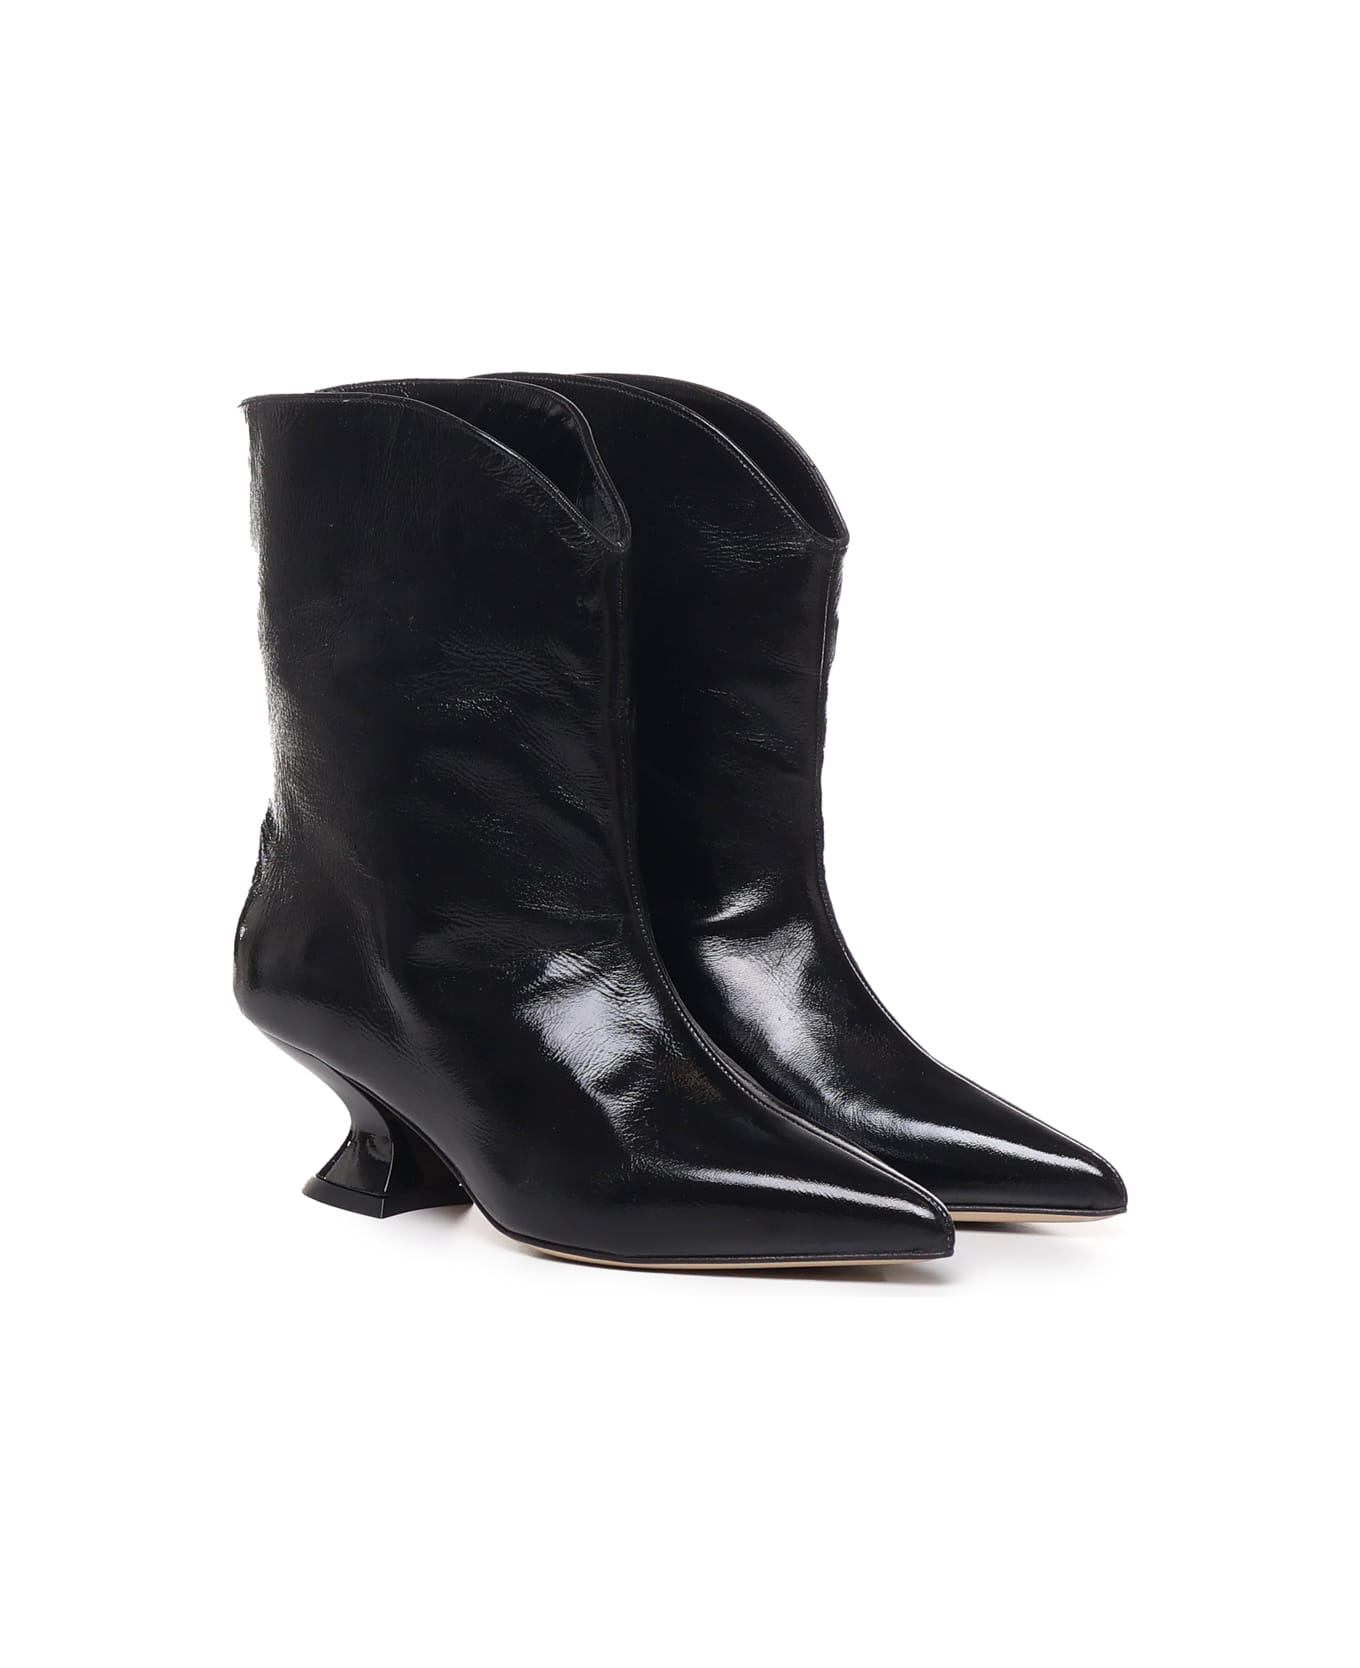 Alchimia Leather Ankle Boot With Low Heel - Black ブーツ